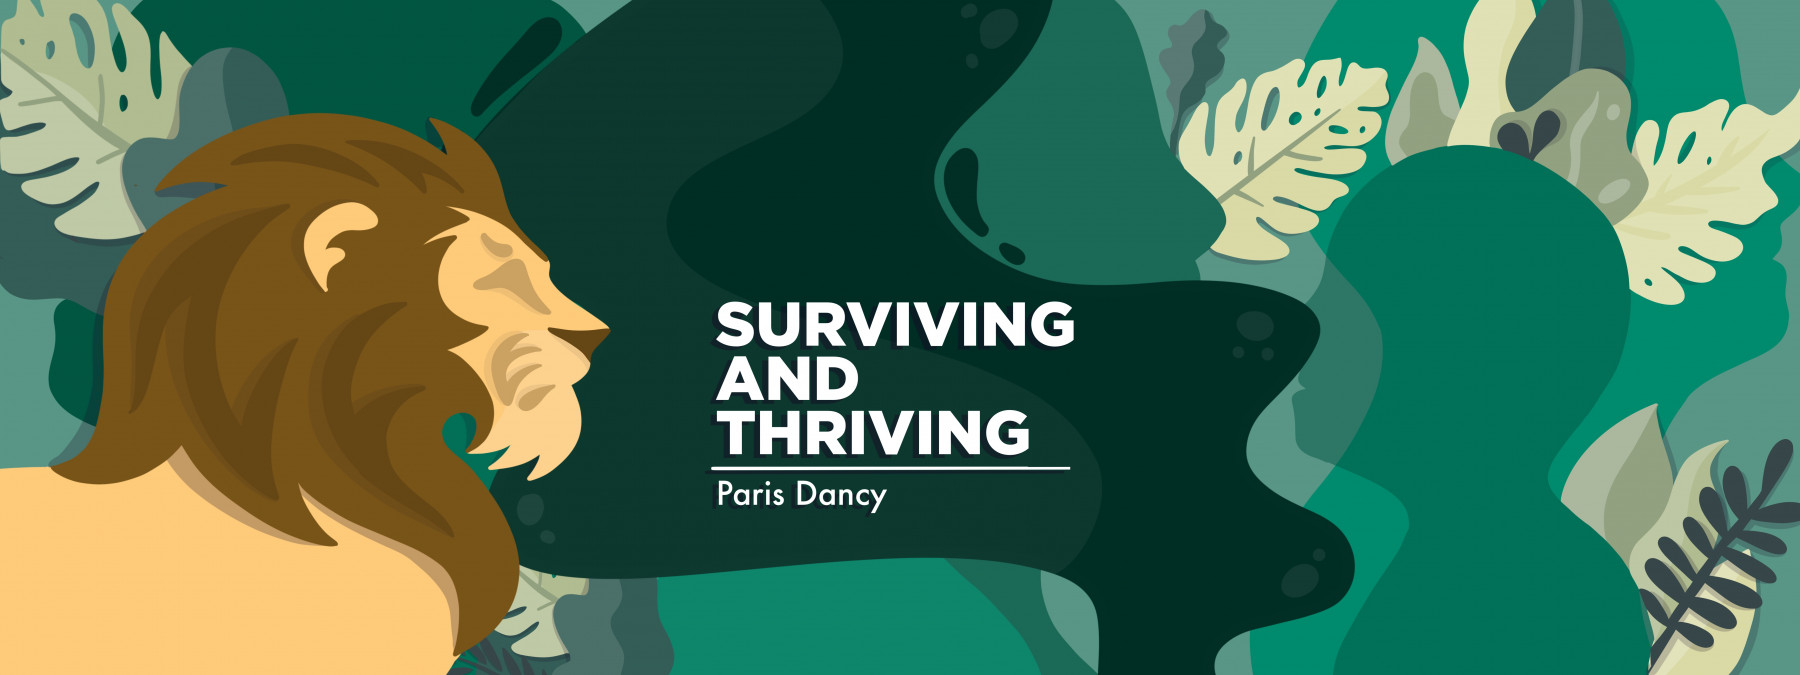 support systems | Cushing's Disease News | banner image for Paris Dancy's 